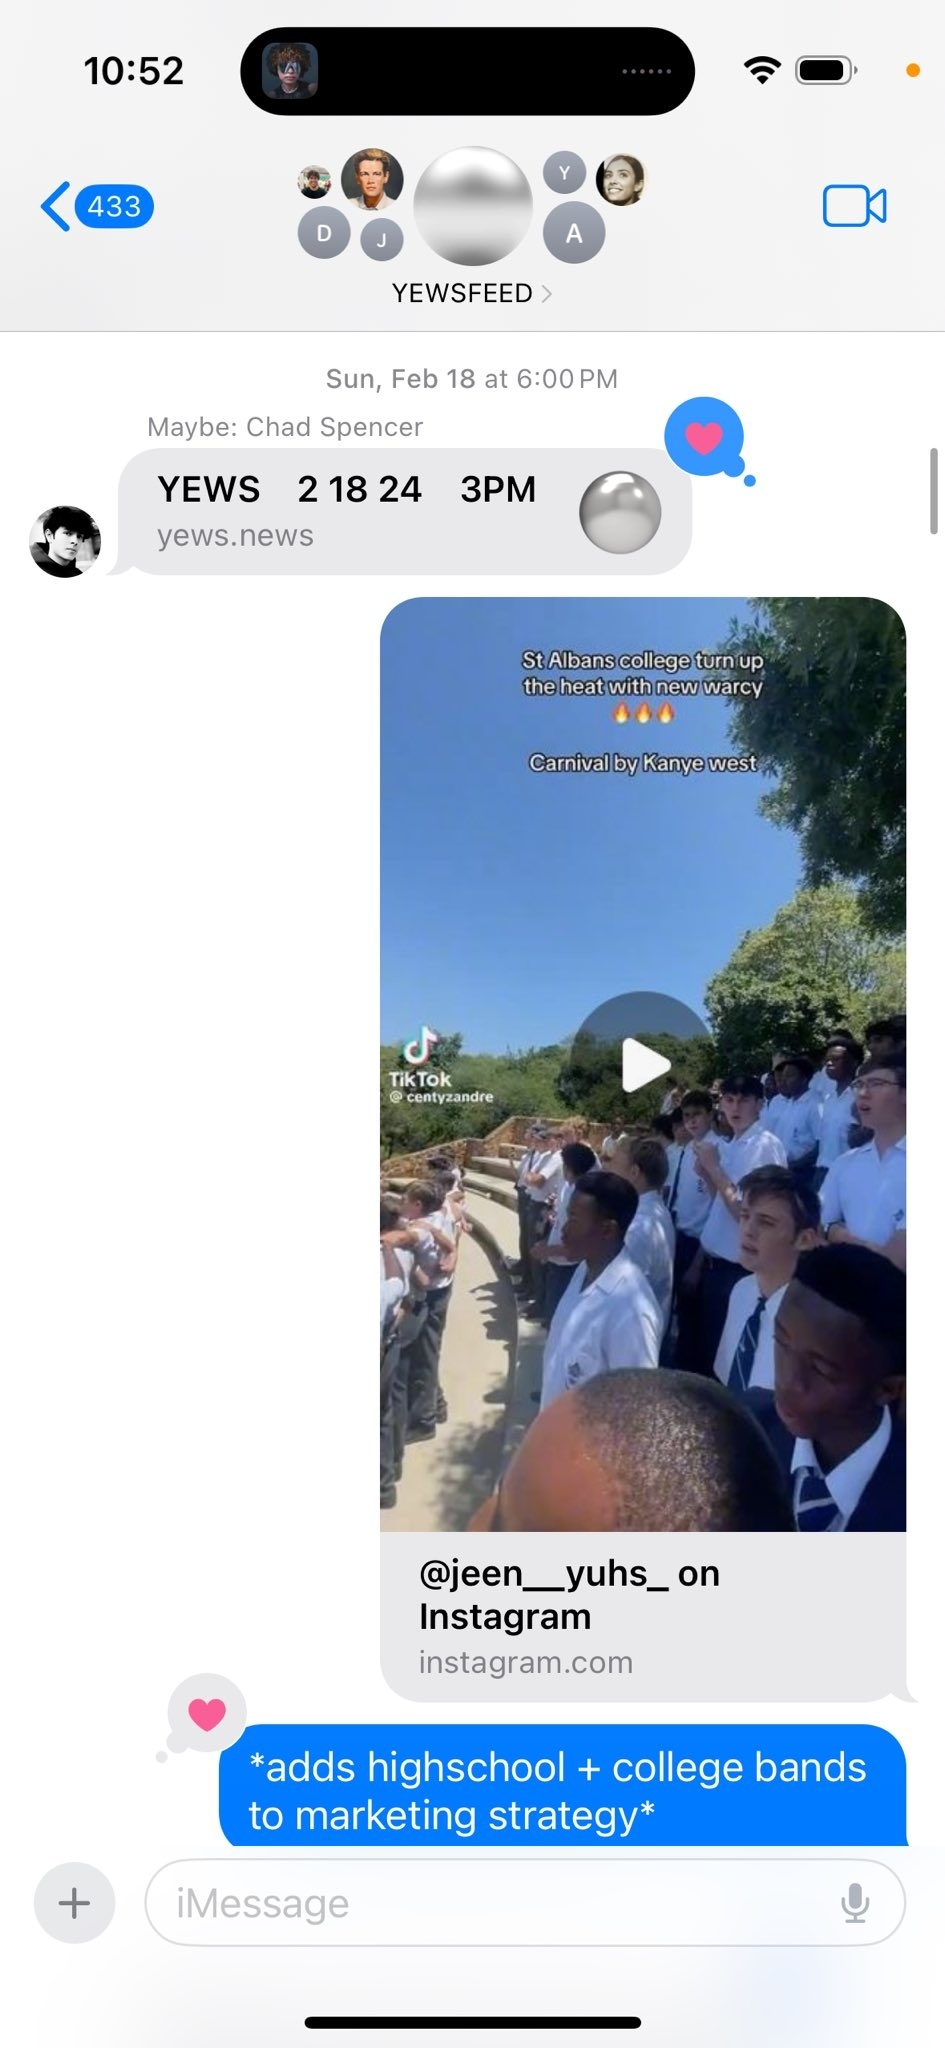 Screenshot from a smartphone displaying a social media app with a video post of a high school band lined up outdoors